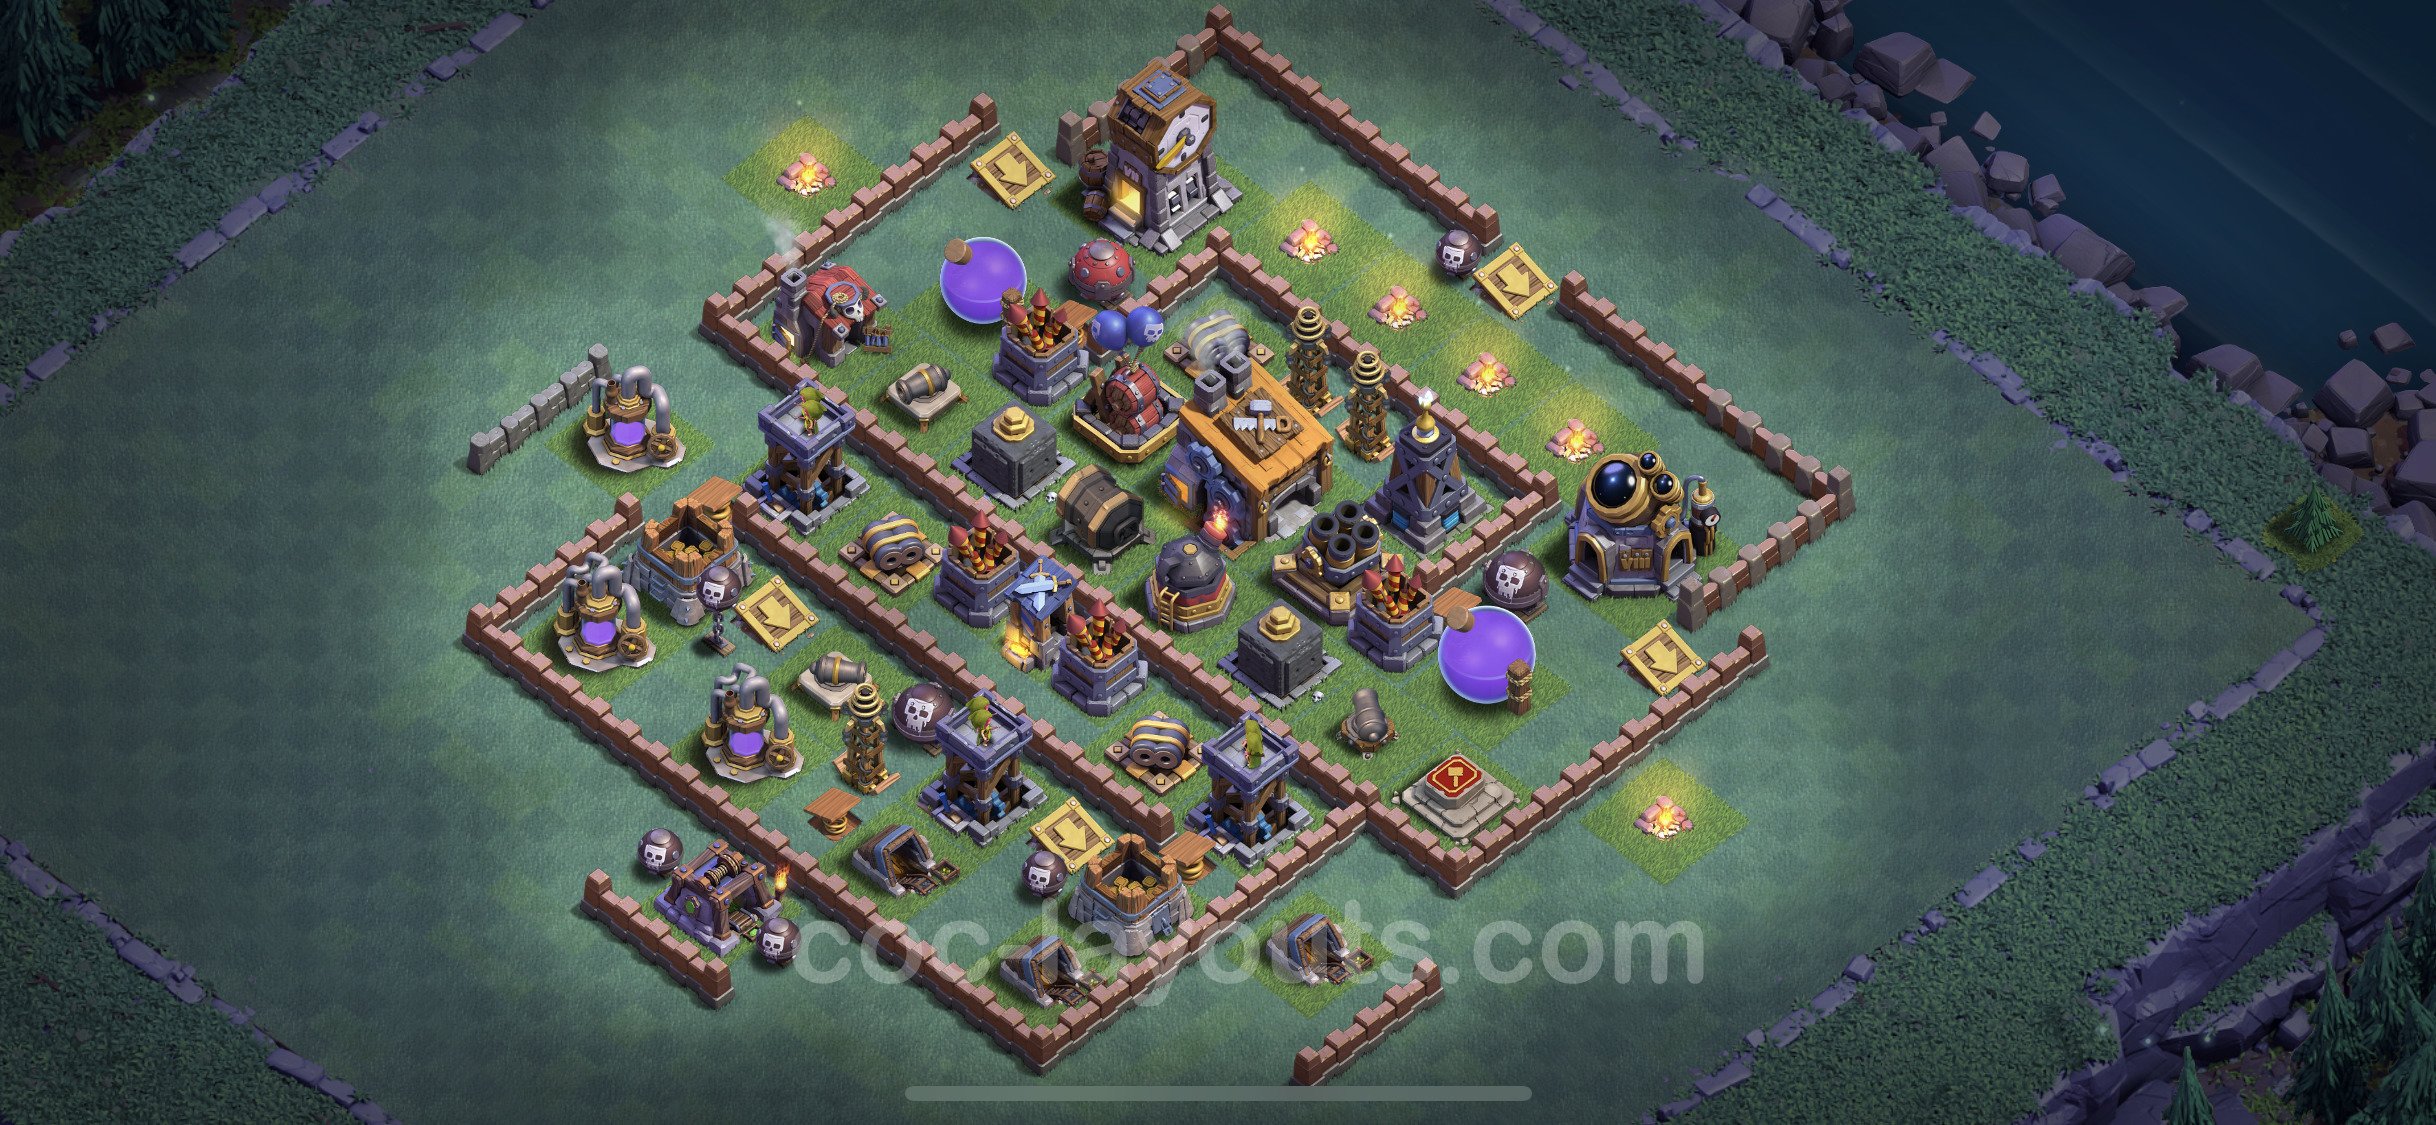 Clash of clans bh8 base